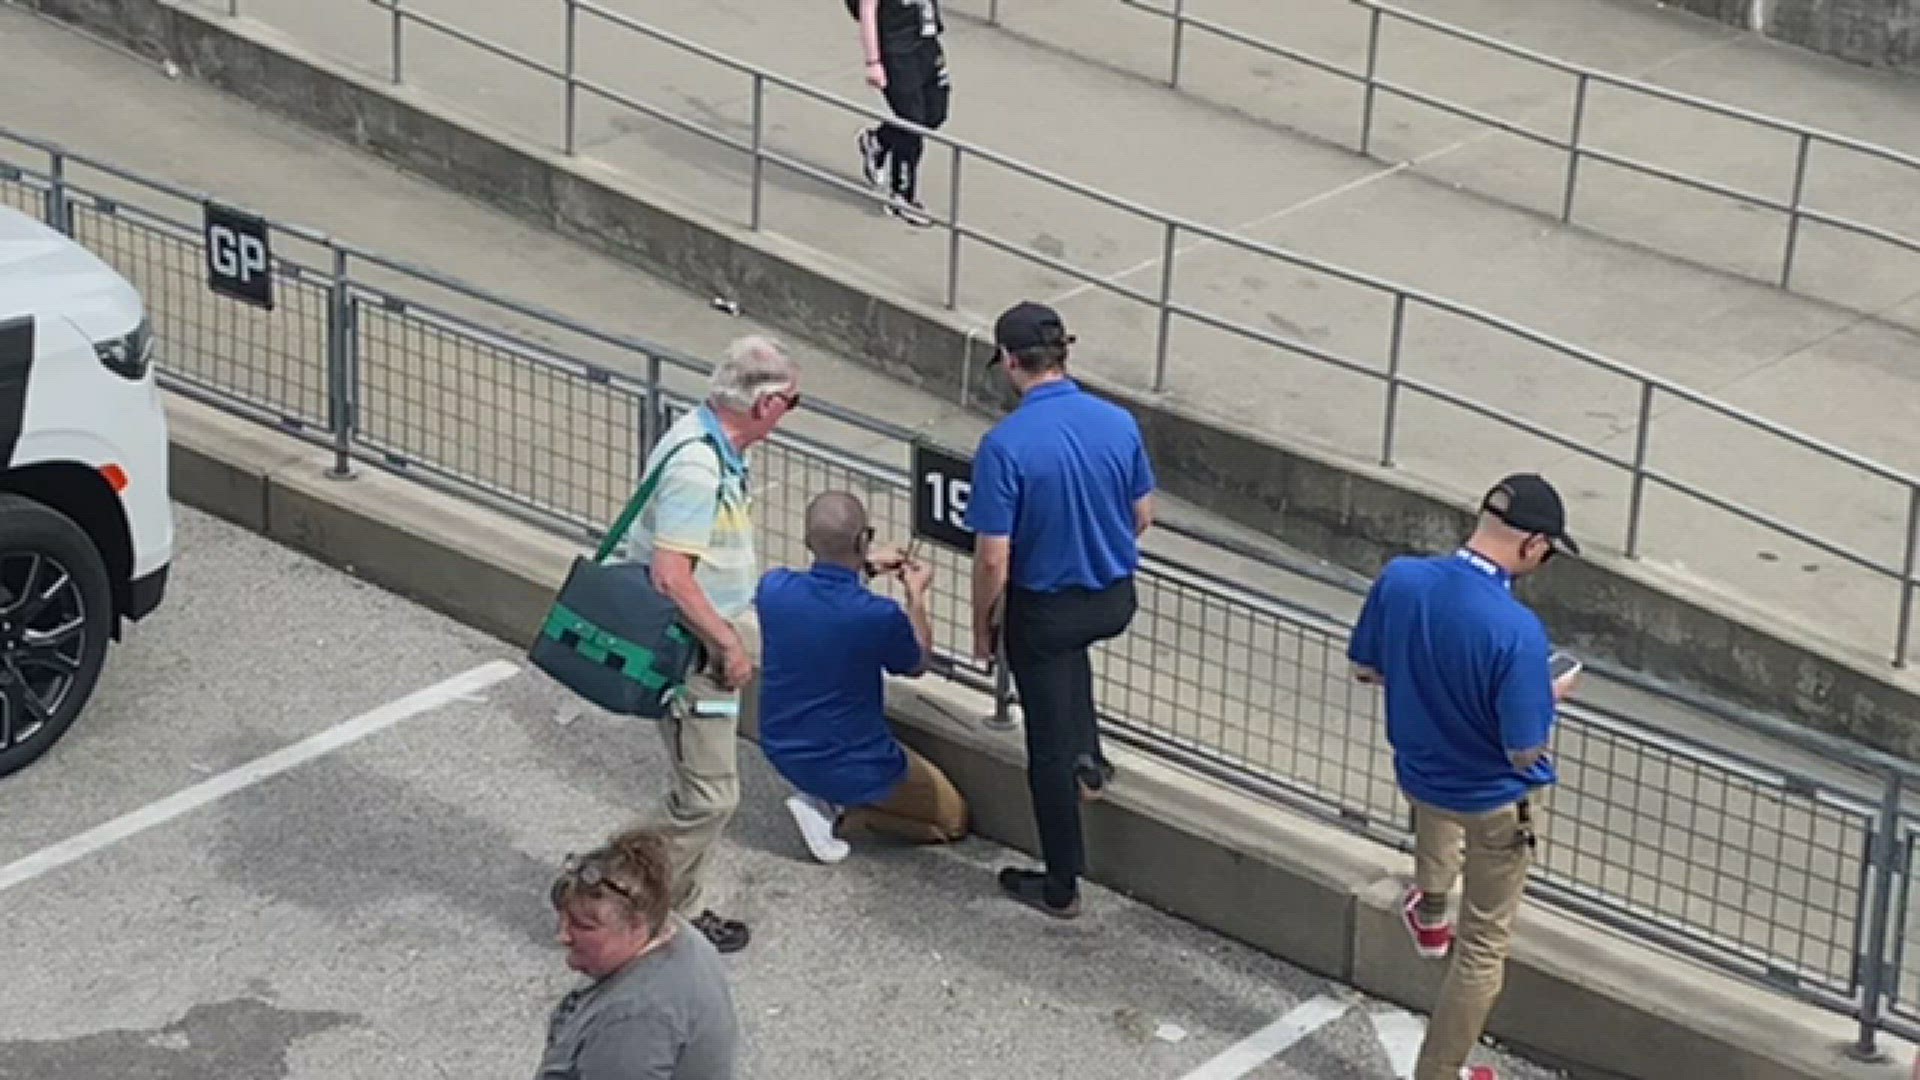 Crews at Indianapolis Motor Speedway wasted no time updating owner Roger Penske's parking spot to mark his team's 19 Indy 500 wins.